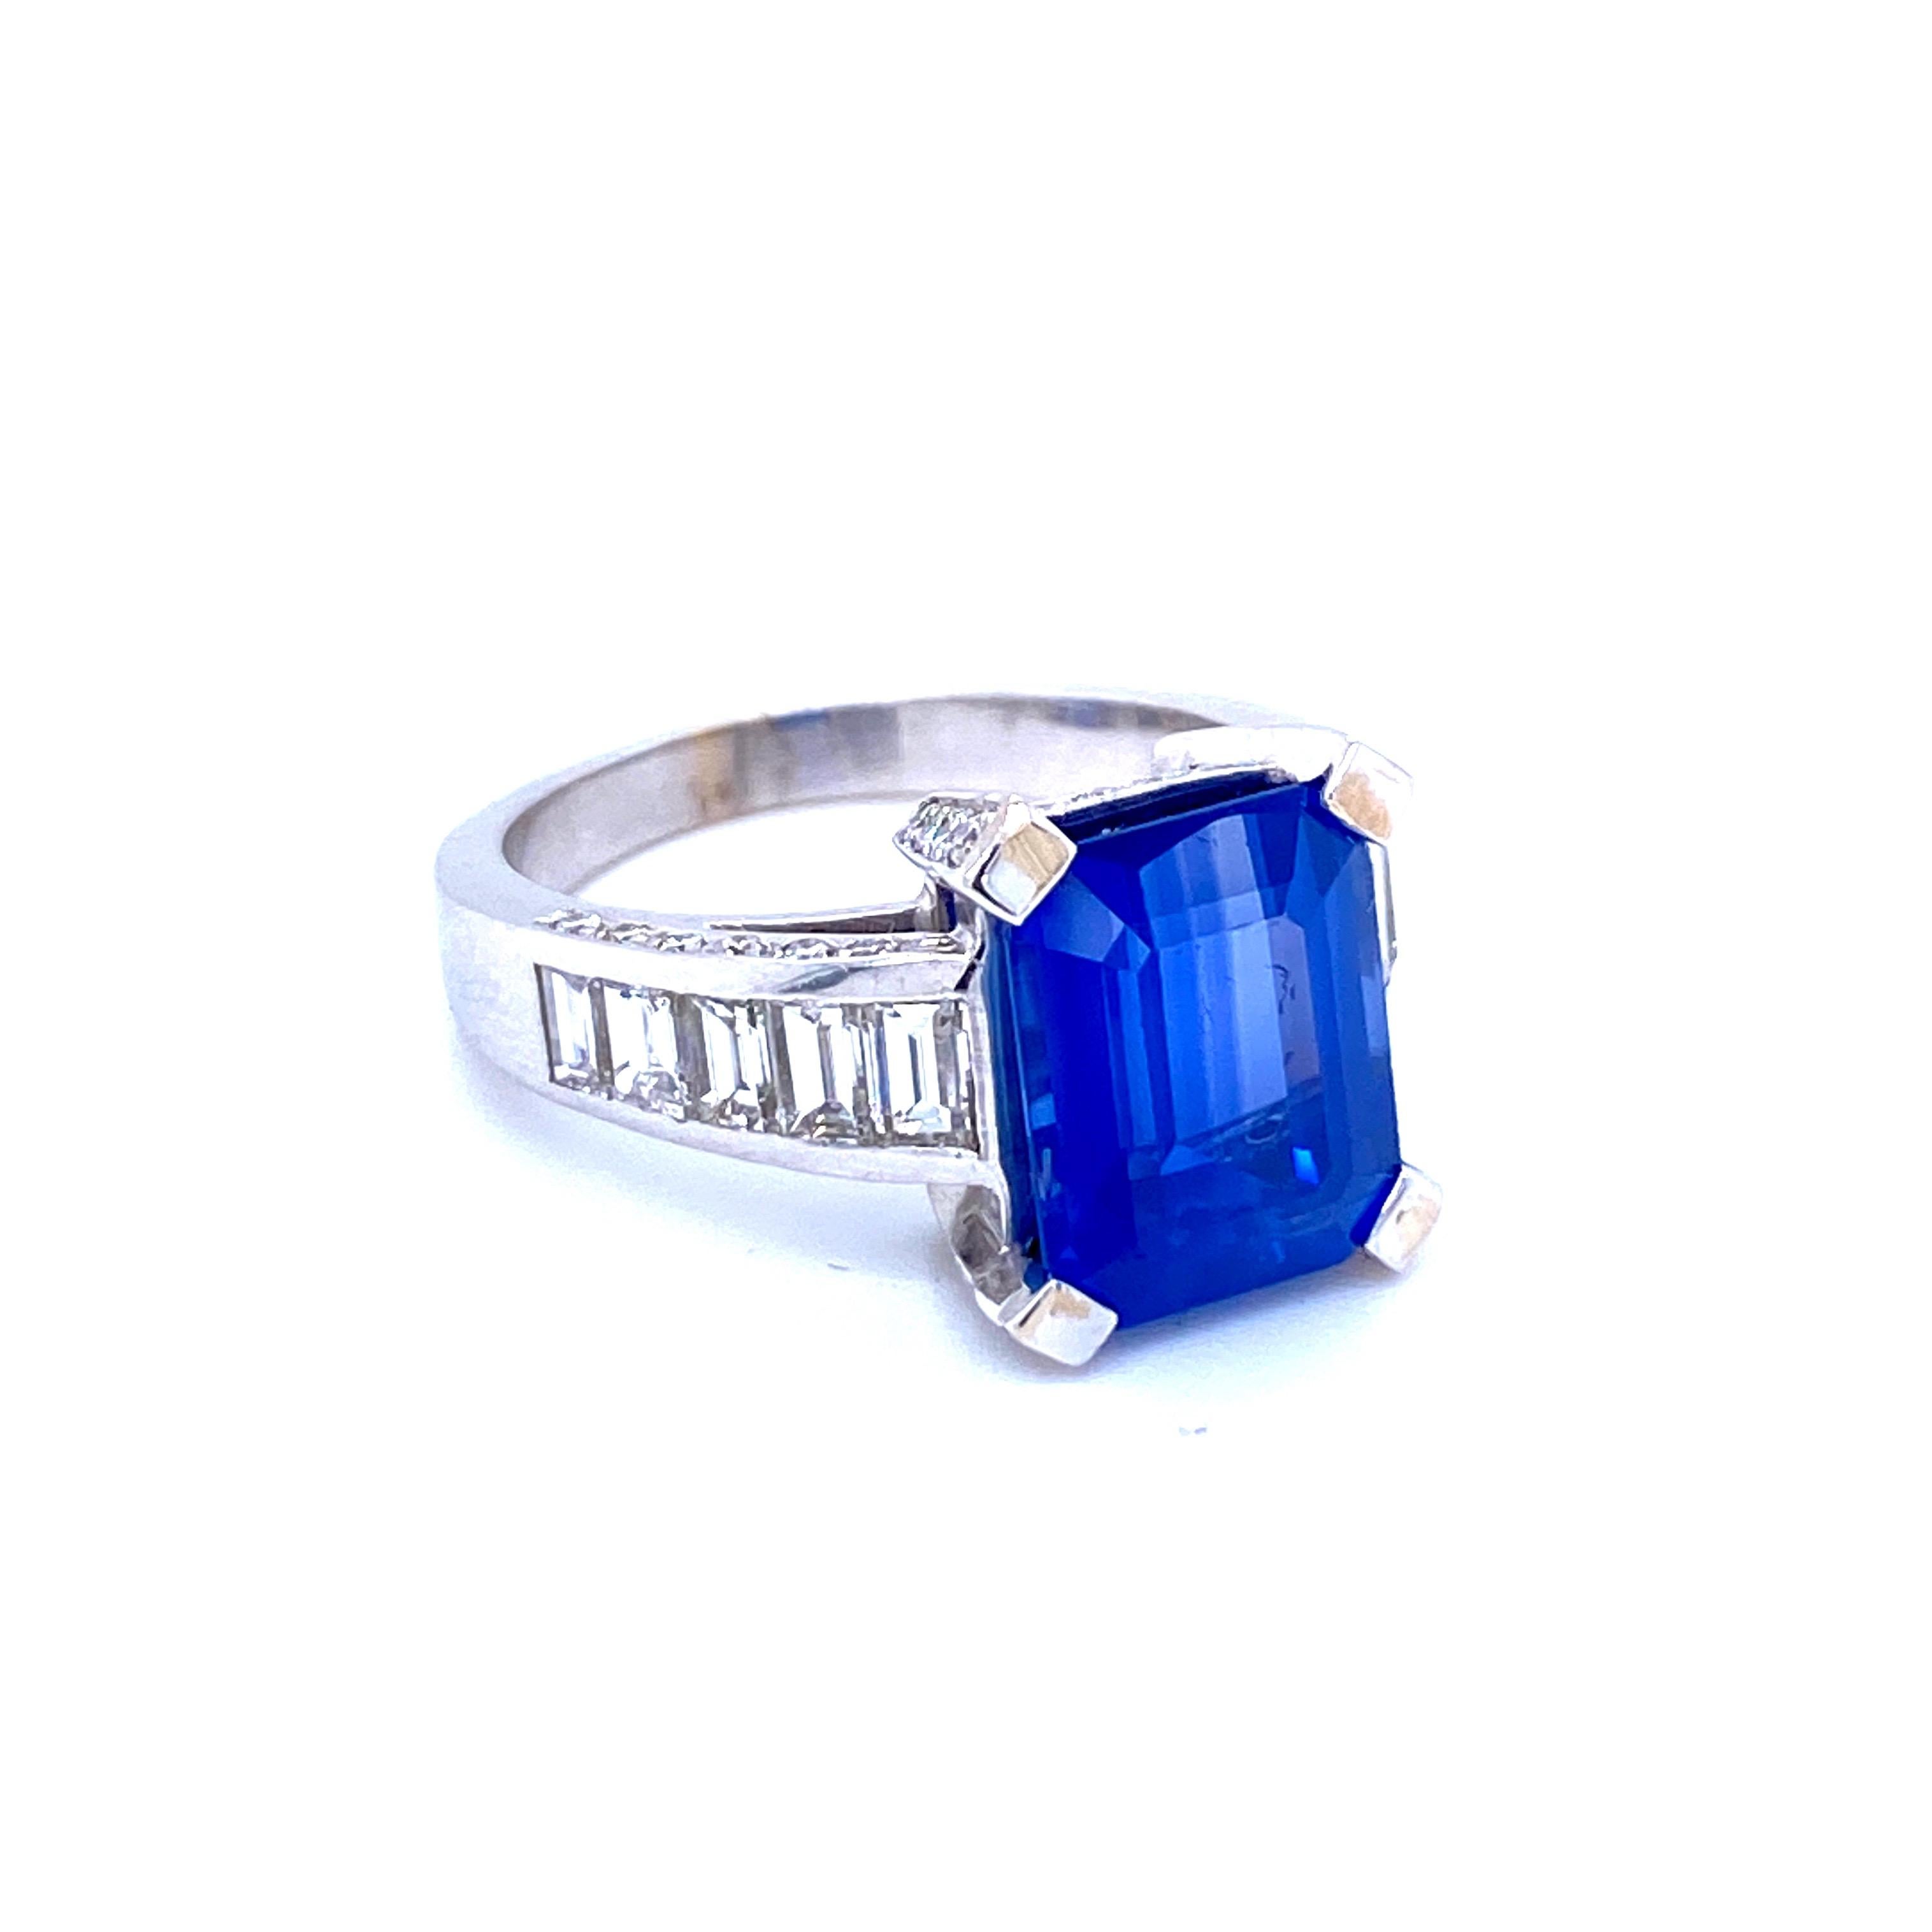 This beautiful Sapphire and Diamond Art Deco style Ring is crafted in solid 18k white gold and it weighs approx. 8.60 grams.
A stunning, royal blue mixed-cut Ceylon Sapphire weighing 6.59 carats,  flanked by 10 baguette cut diamonds and 42 round